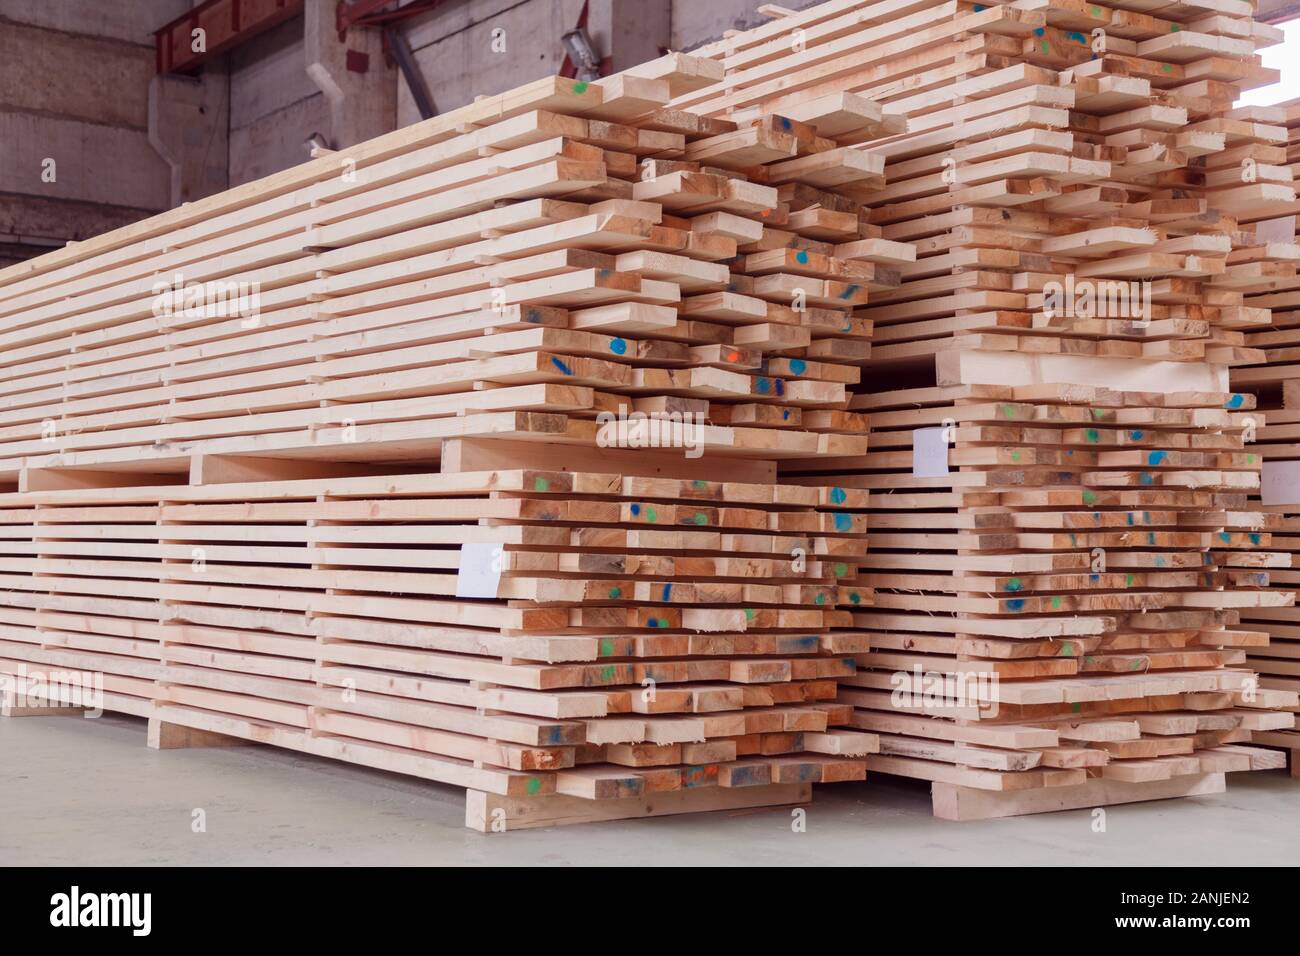 Warehouse or factory for sawing boards on sawmill indoors. Wood timber stack of wooden blanks construction material. Logging Industry. Stock Photo